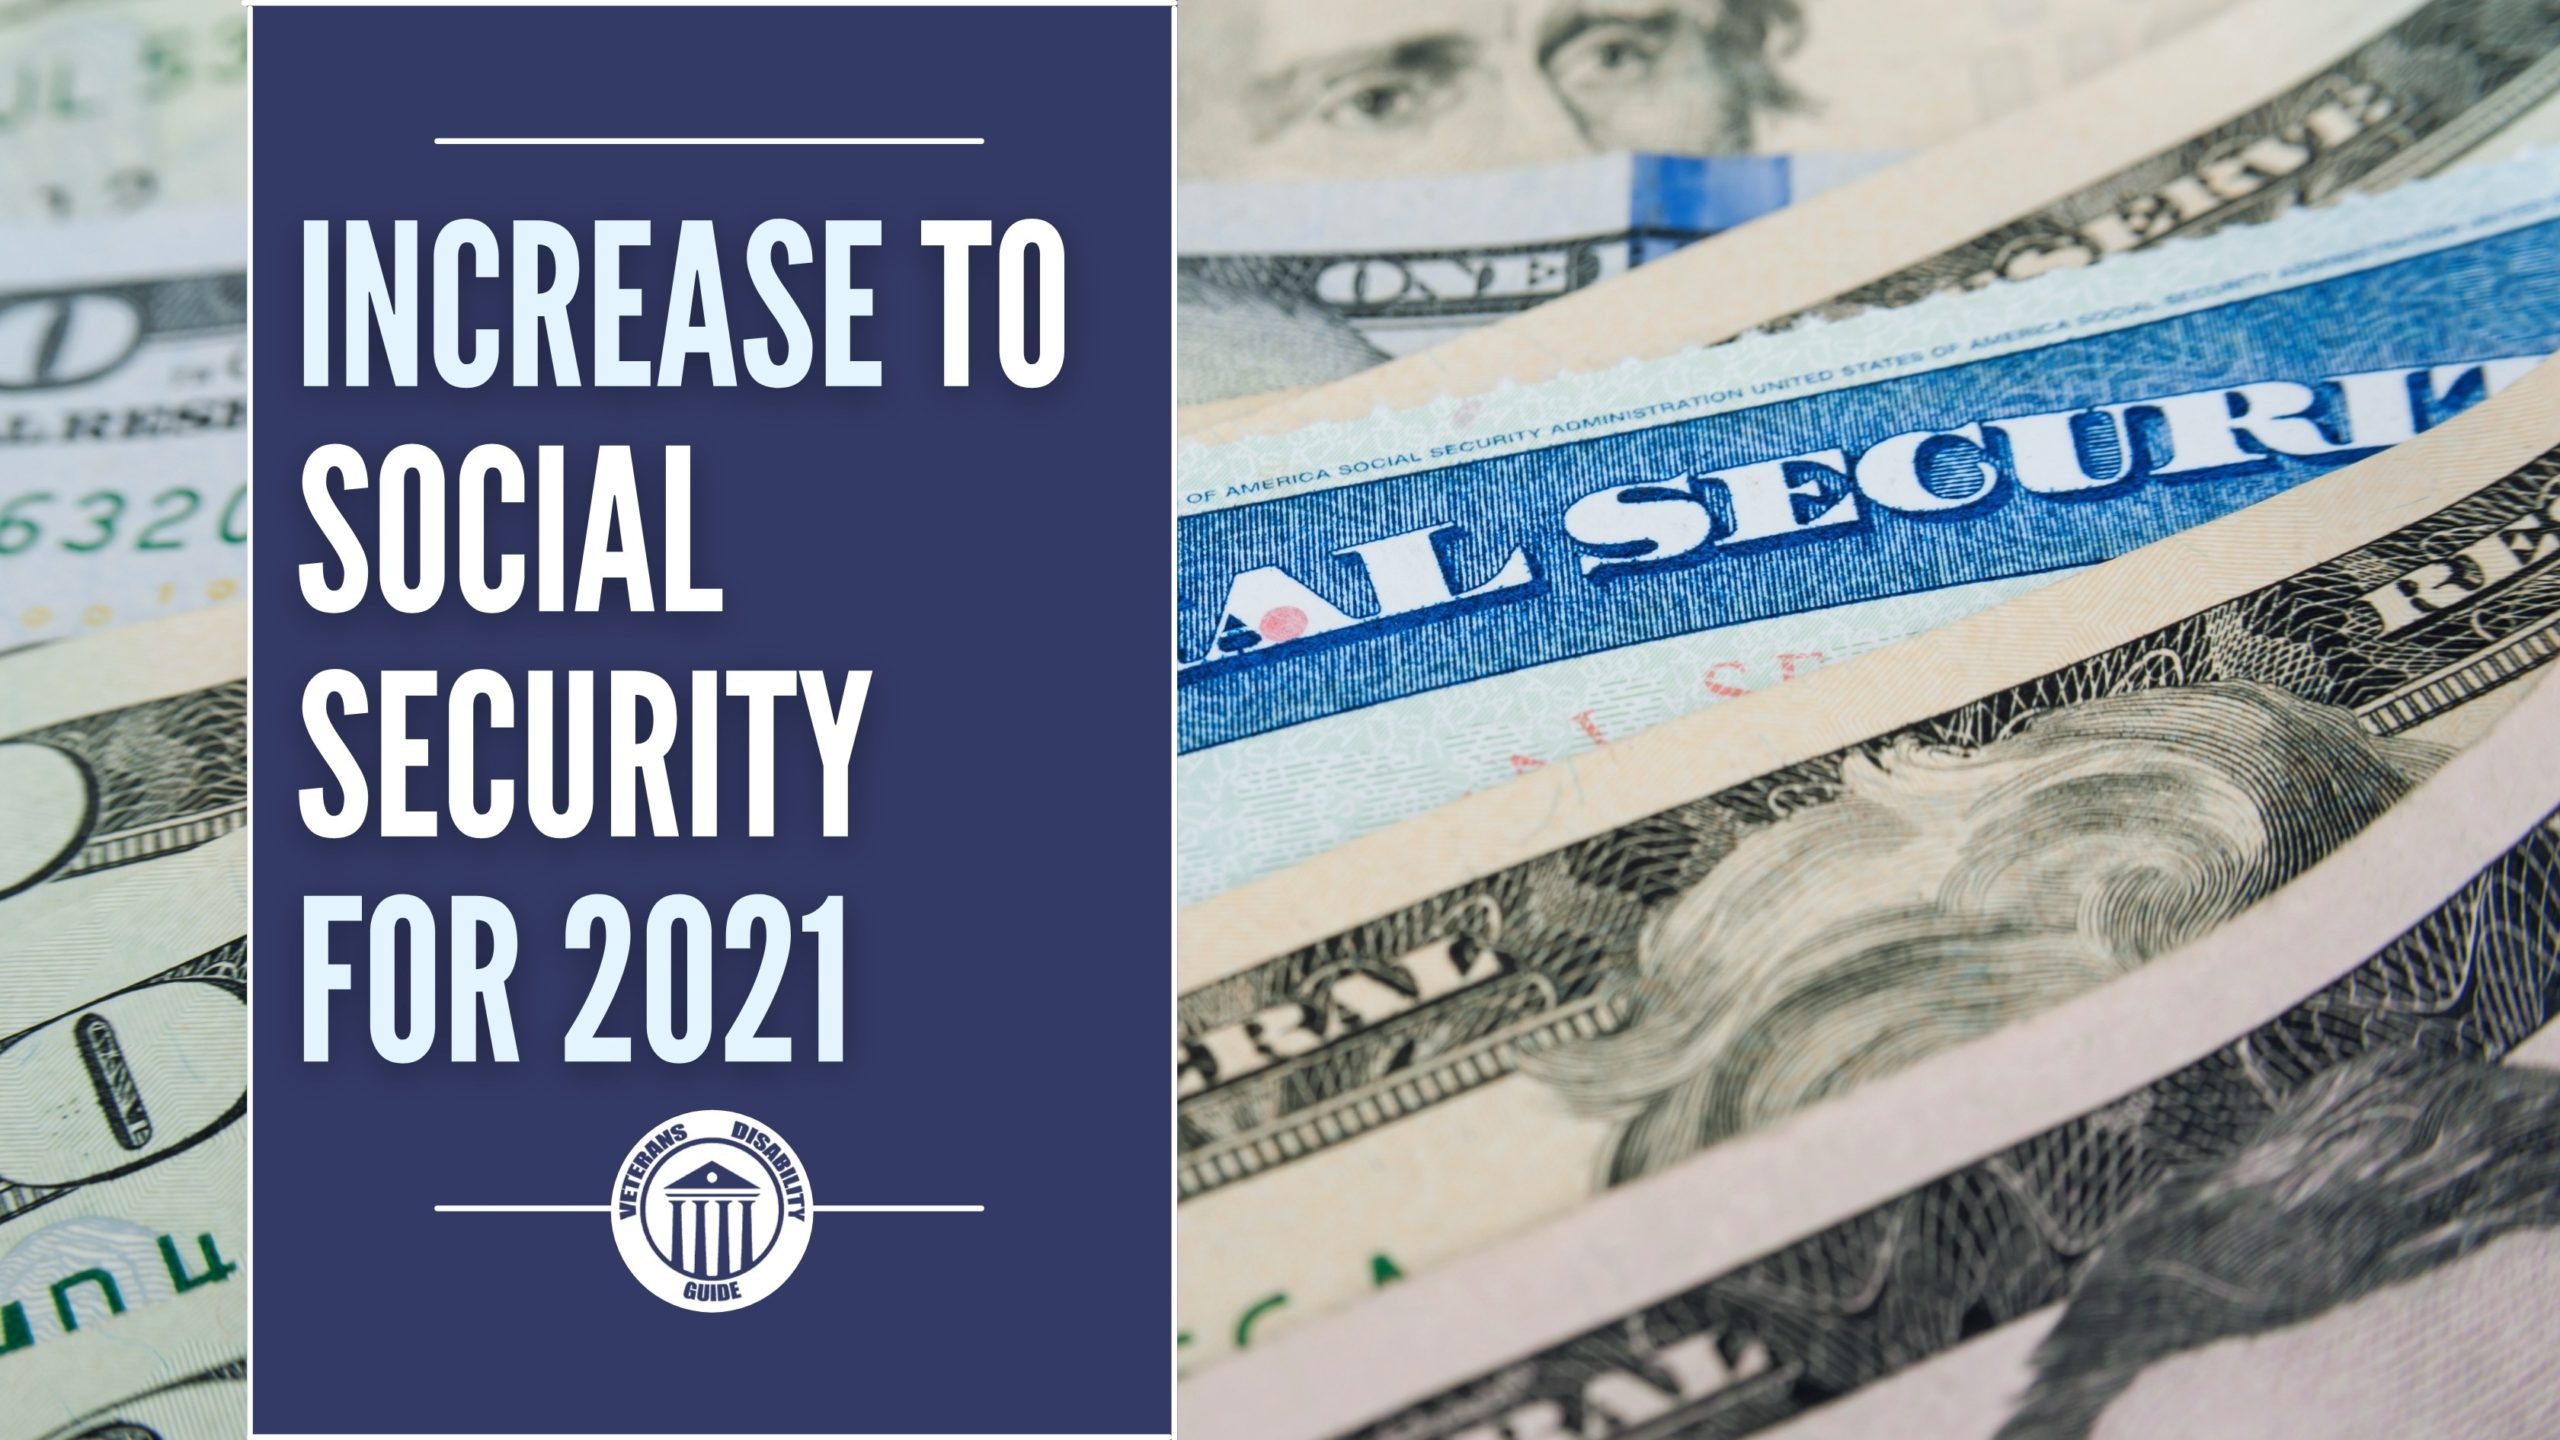 Increase to Social Security for 2021 blog header image